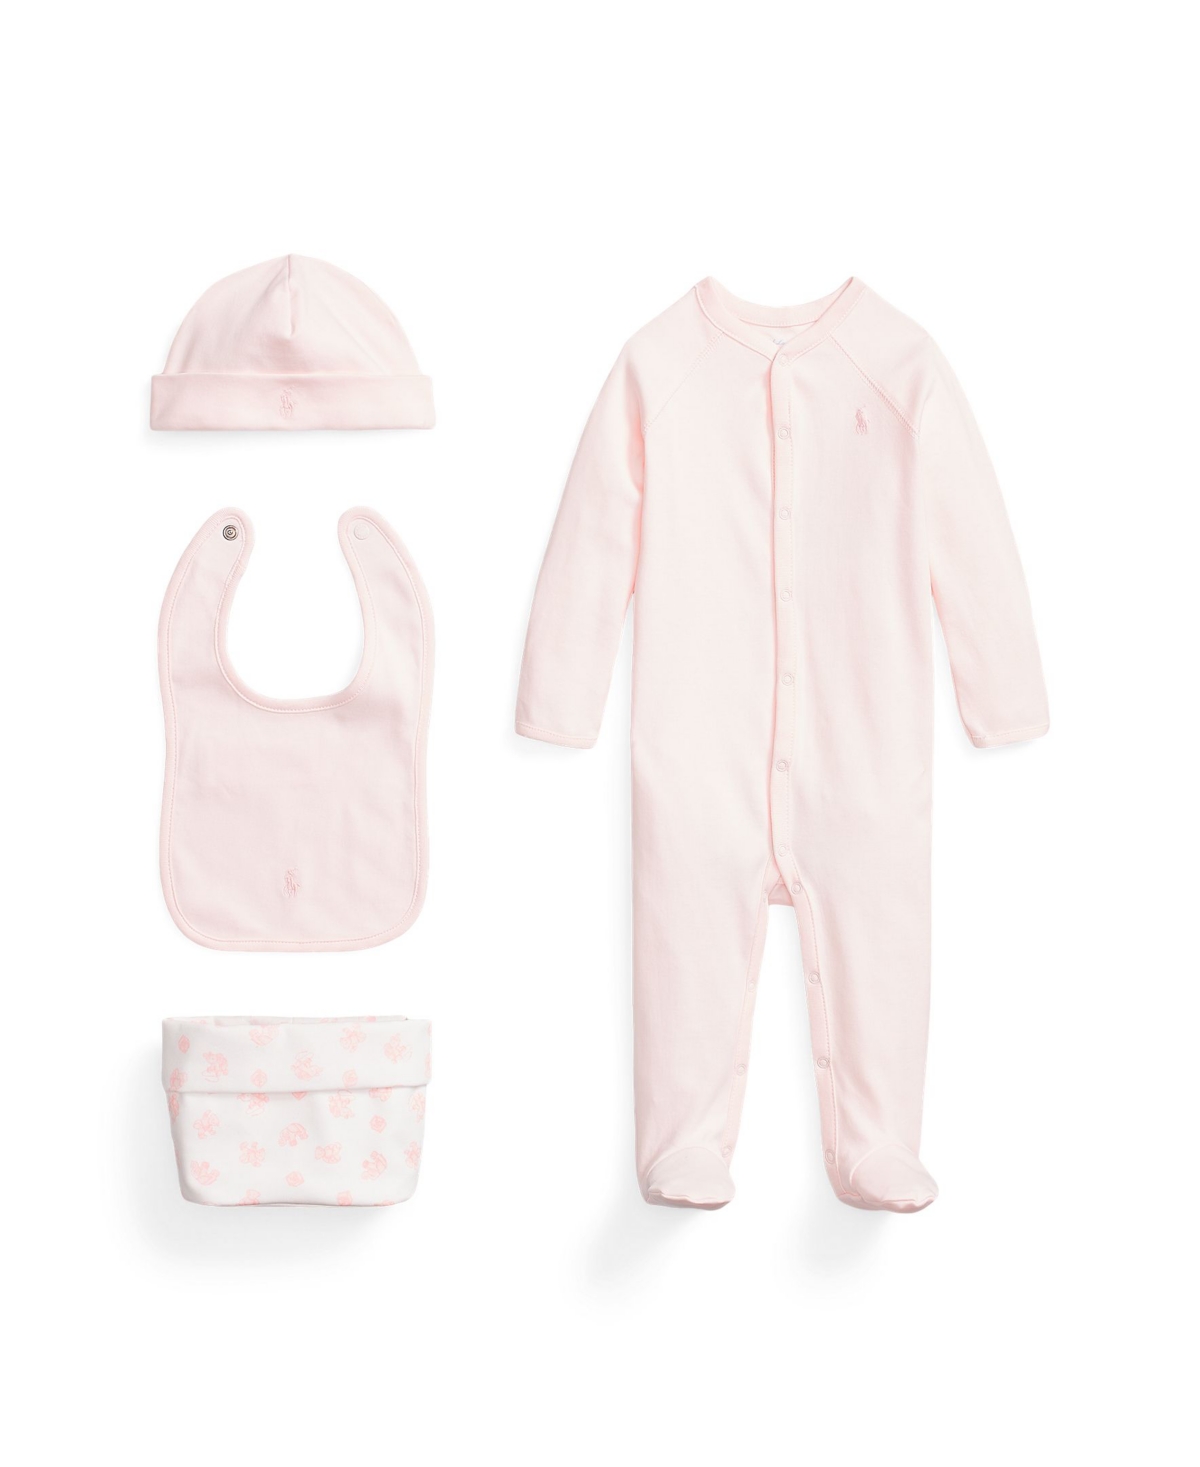 Polo Ralph Lauren Baby Boys Or Girls Organic Cotton Gift Set, 4 Piece In Delicate Pink